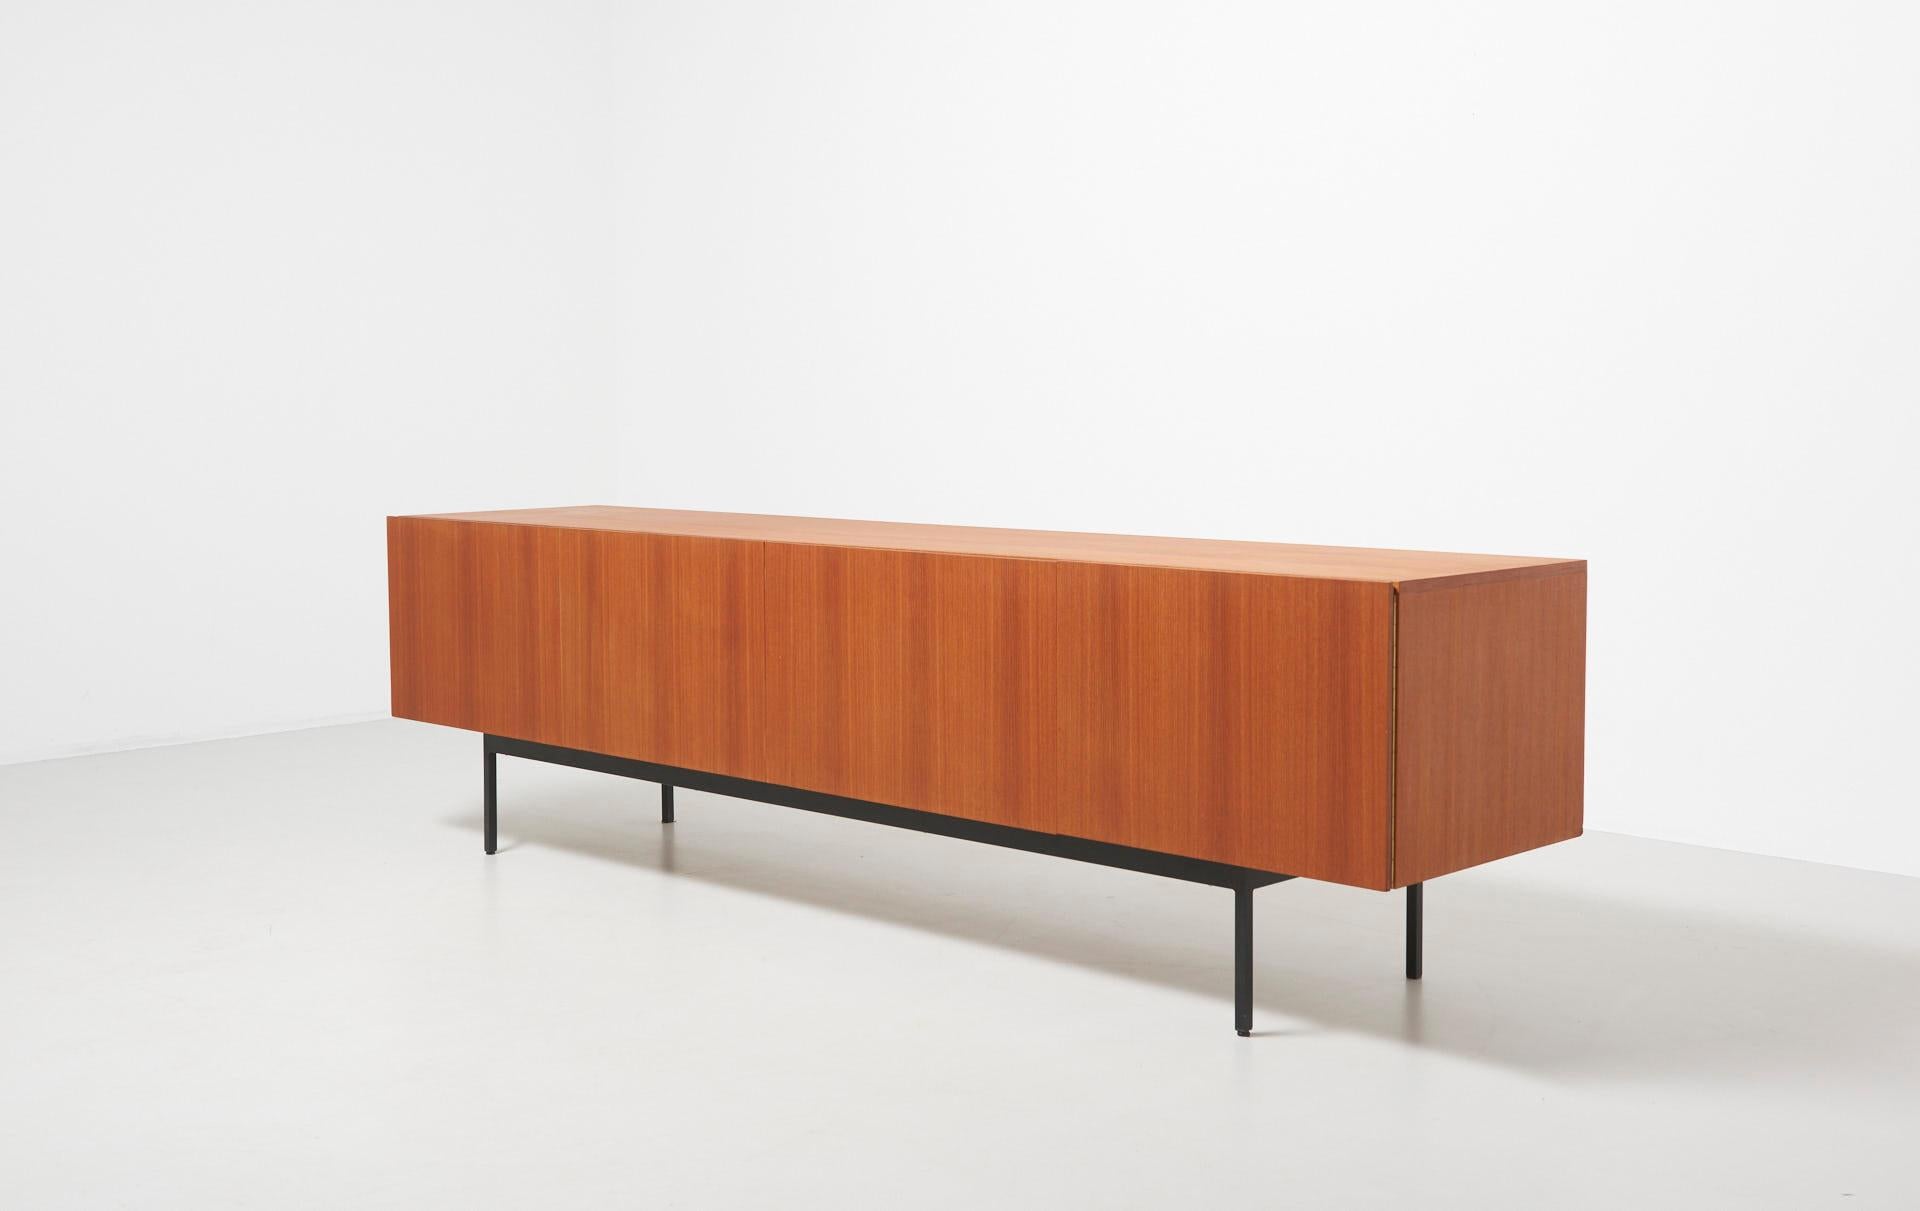 B-40 sideboard in teak with black metal frame. Drawers and a mobile beverage cart in maple.
Designed by Dieter Waeckerlin in 1958.
Produced by Behr in Germany.